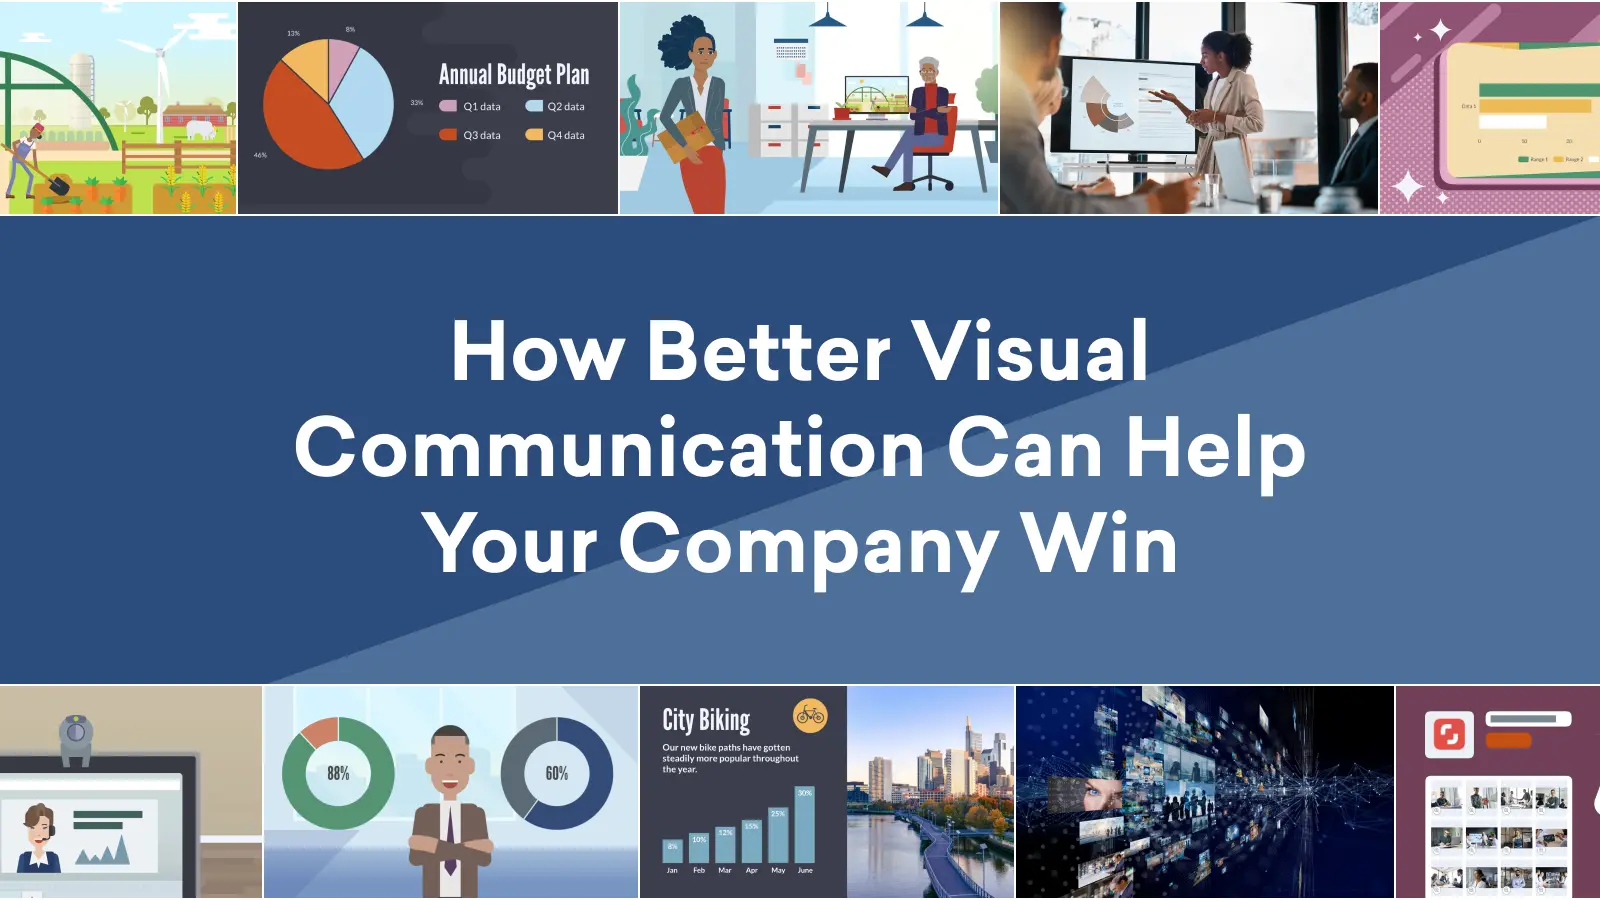 How Better Visual Communication Can Help Your Company Win: Benefits, Tips, and Examples